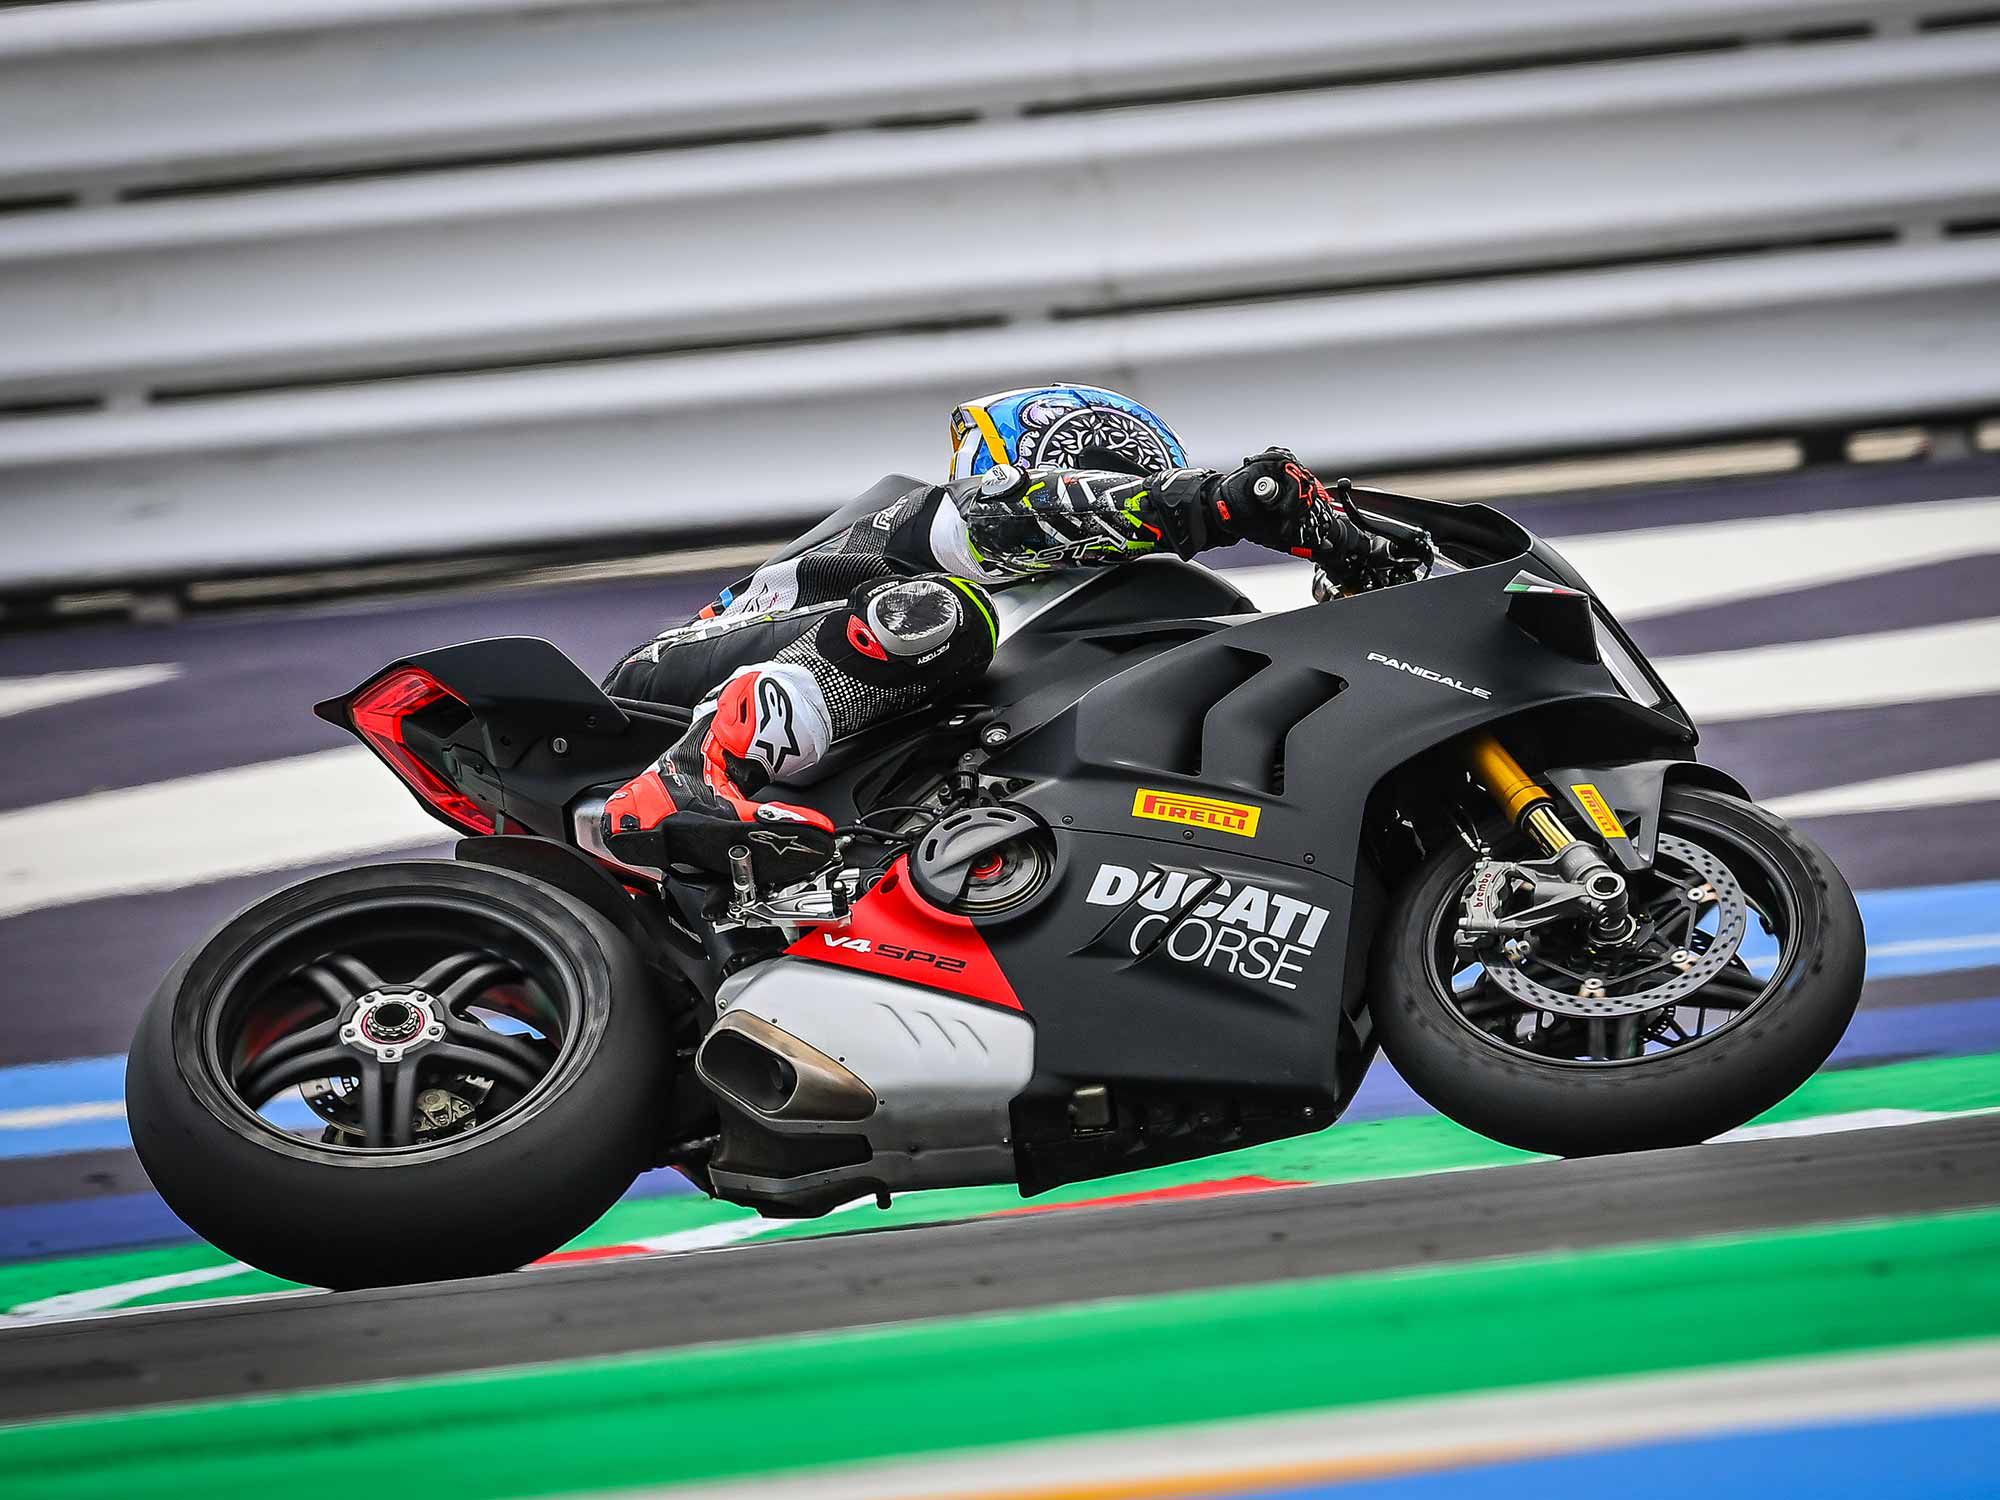 In back-to-back private testing, Ducati test rider Alessandro Valia was one second faster on the SP2 than on the V4 S. As both bikes use the same engine, the difference in lap times is purely down to handling.